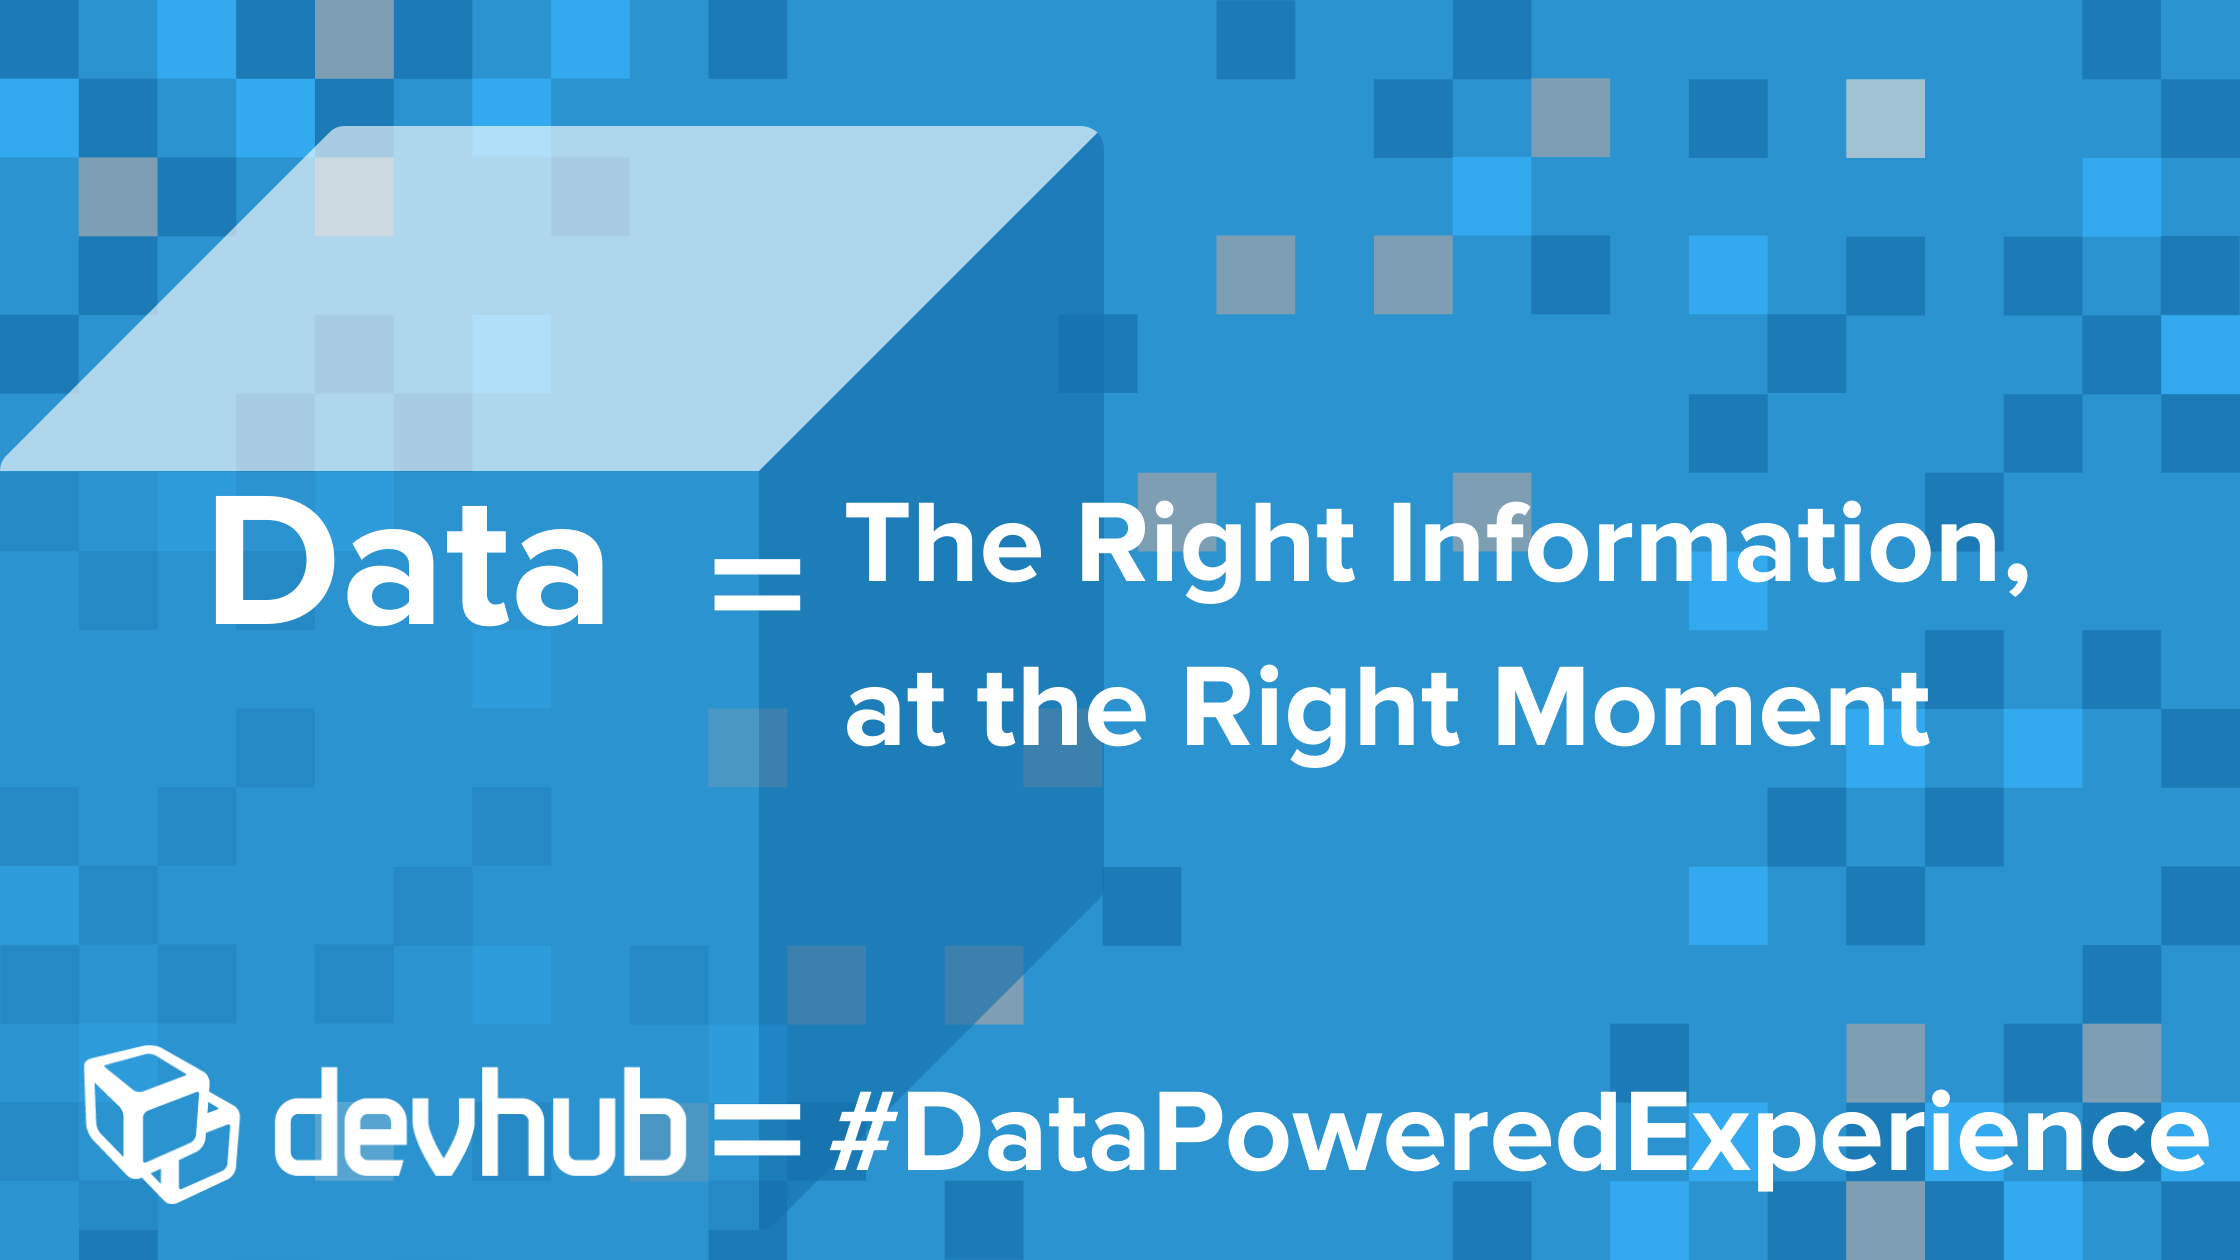 Data equals the right information at the right moment for data powered experiences